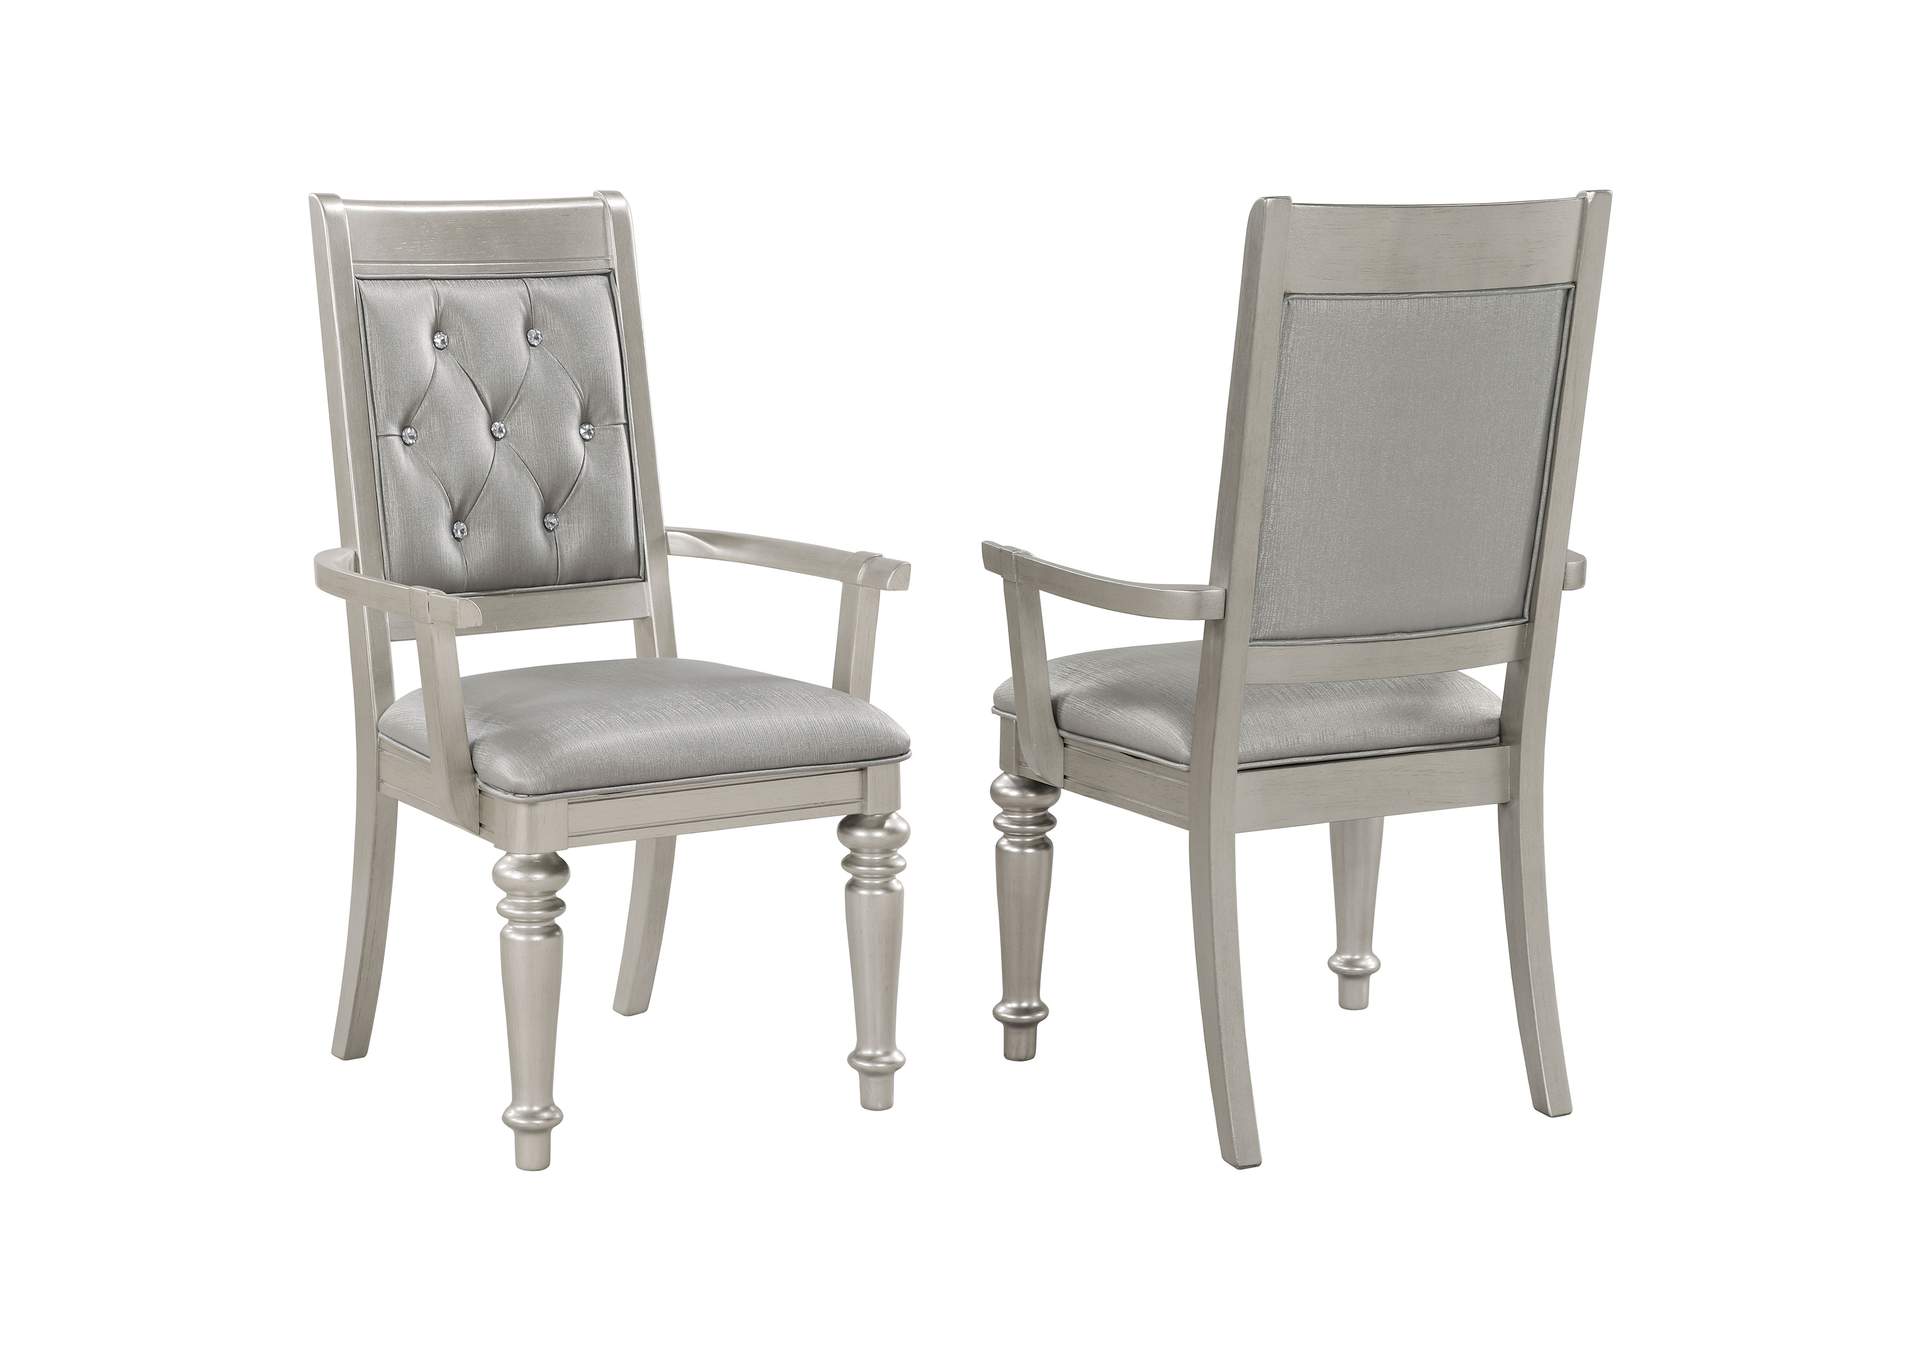 Danette Open Back Arm Chairs Metallic (Set of 2),Coaster Furniture